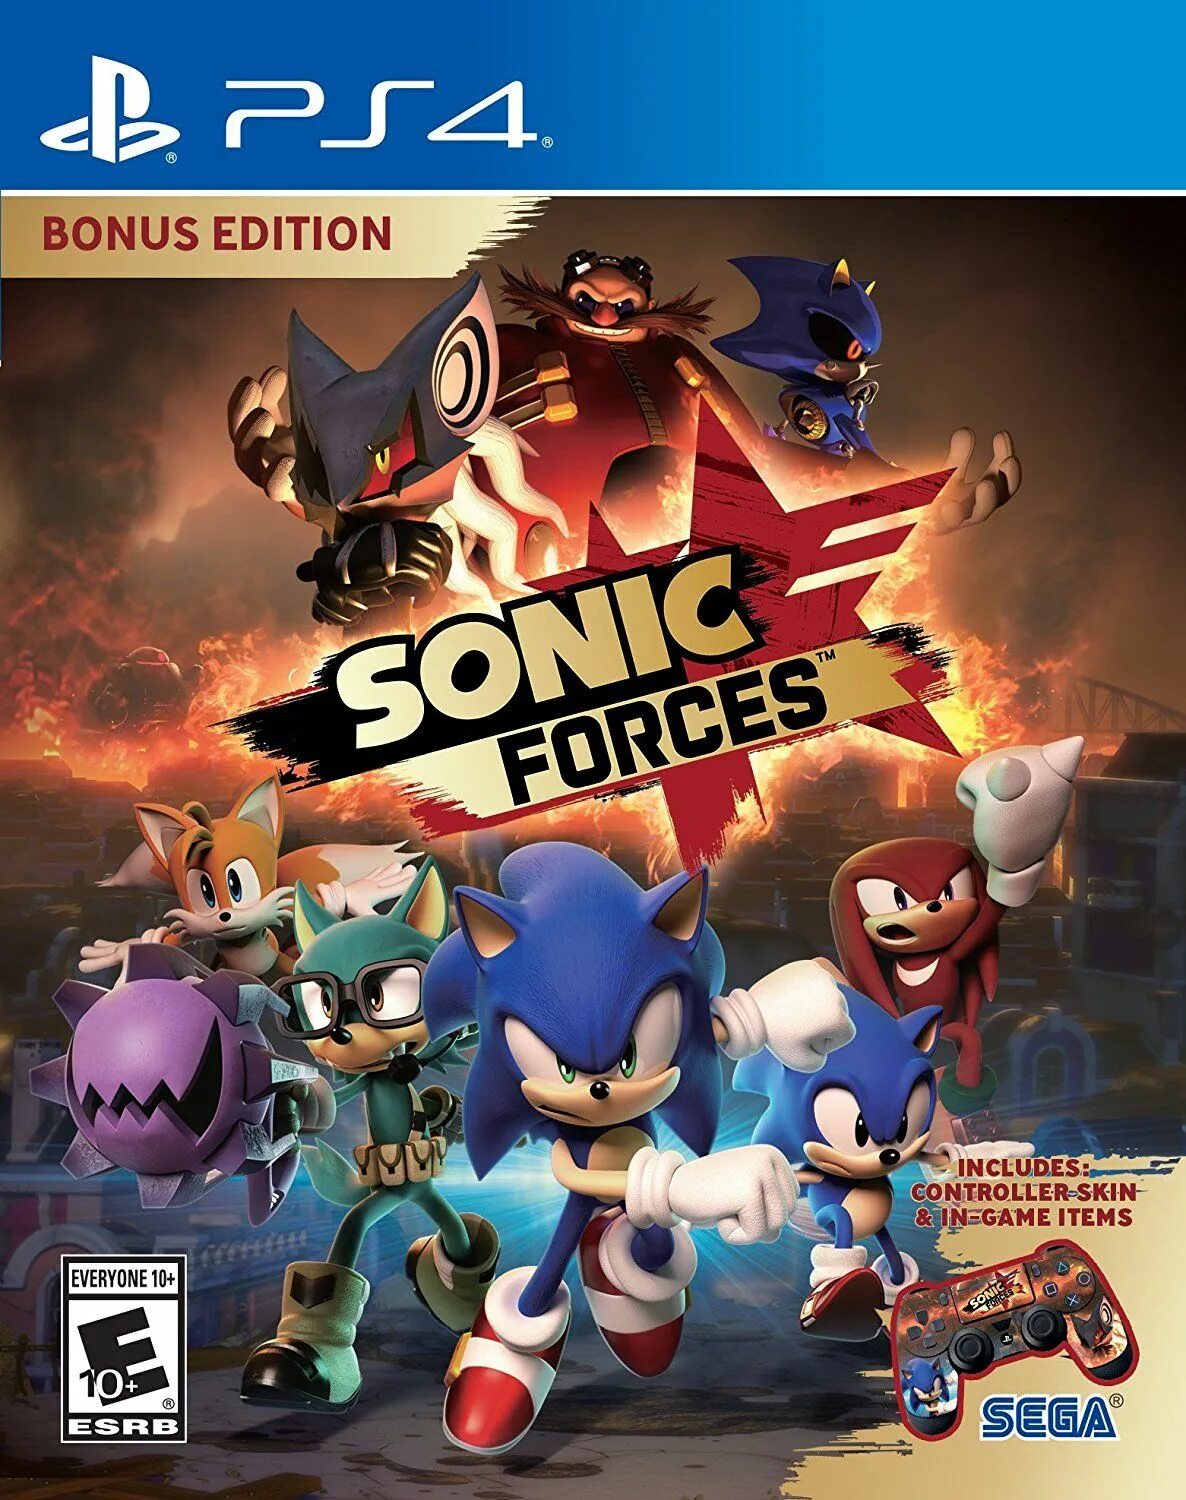 PLAYSTATION Sonic Forces ps4. Соник на ПС 4. Игра Соник на ps4. Sonic Forces на ПС 4.